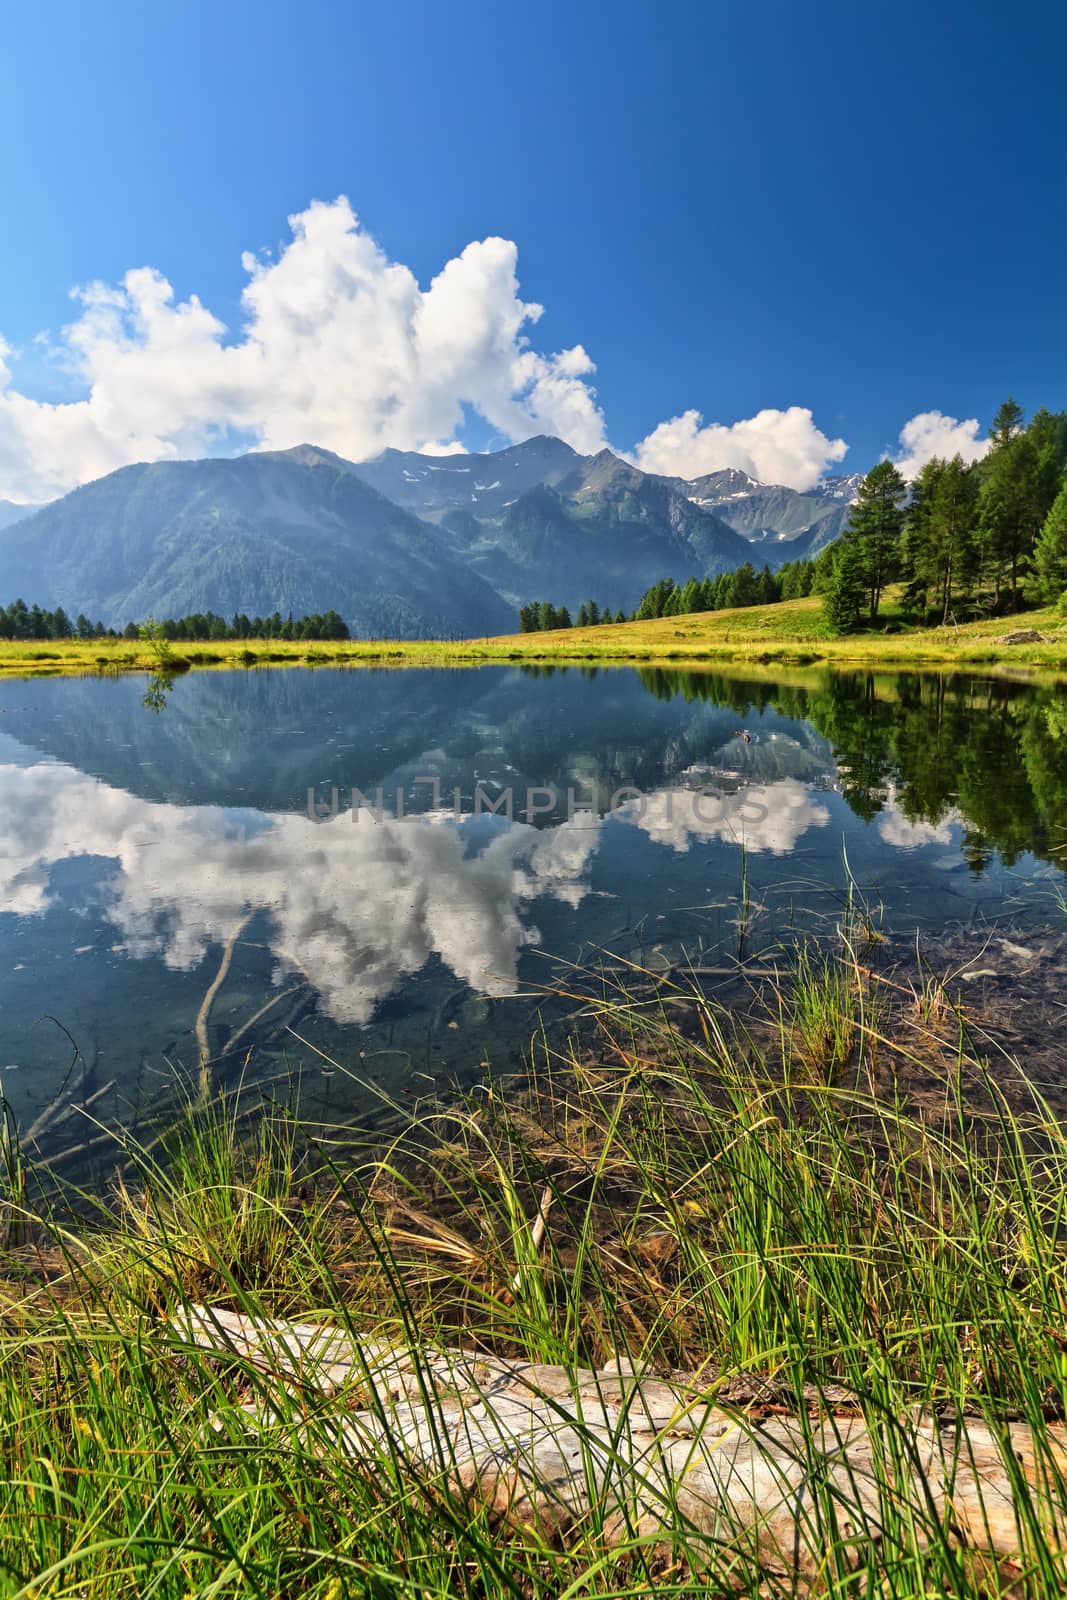 summer view of Covel lake in Pejo Valley, Trentino, Italy